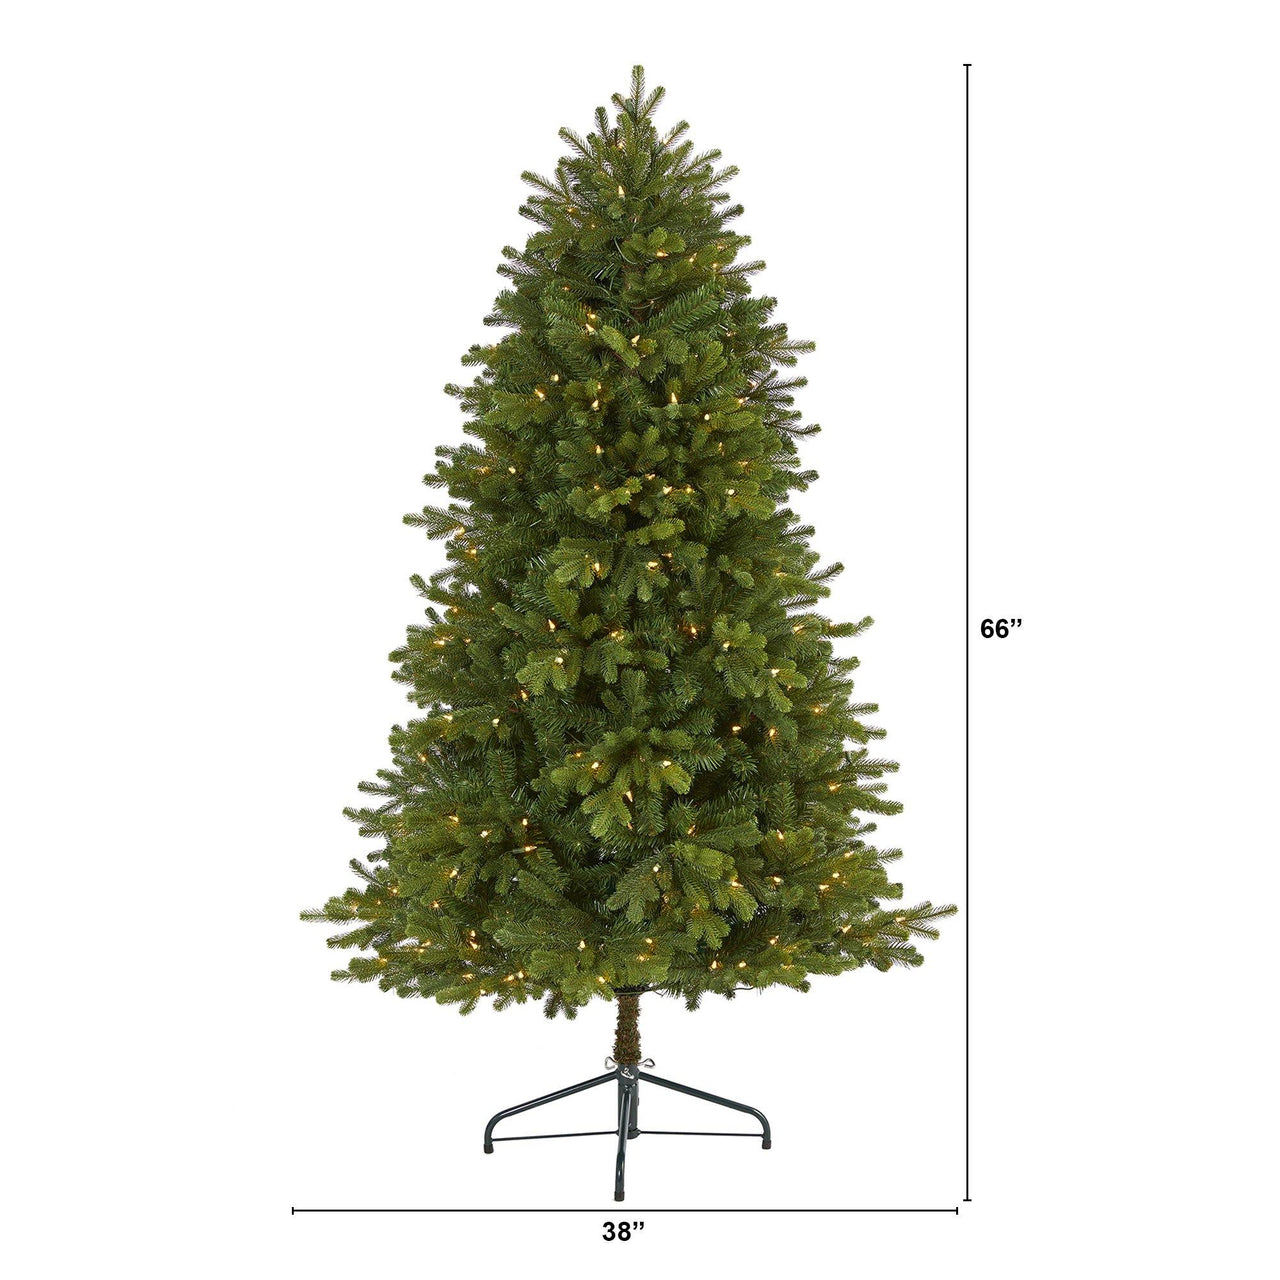 5.5’ Washington Fir Artificial Christmas Tree with 300 Clear Lights and 672 Bendable Branches - The Fox Decor